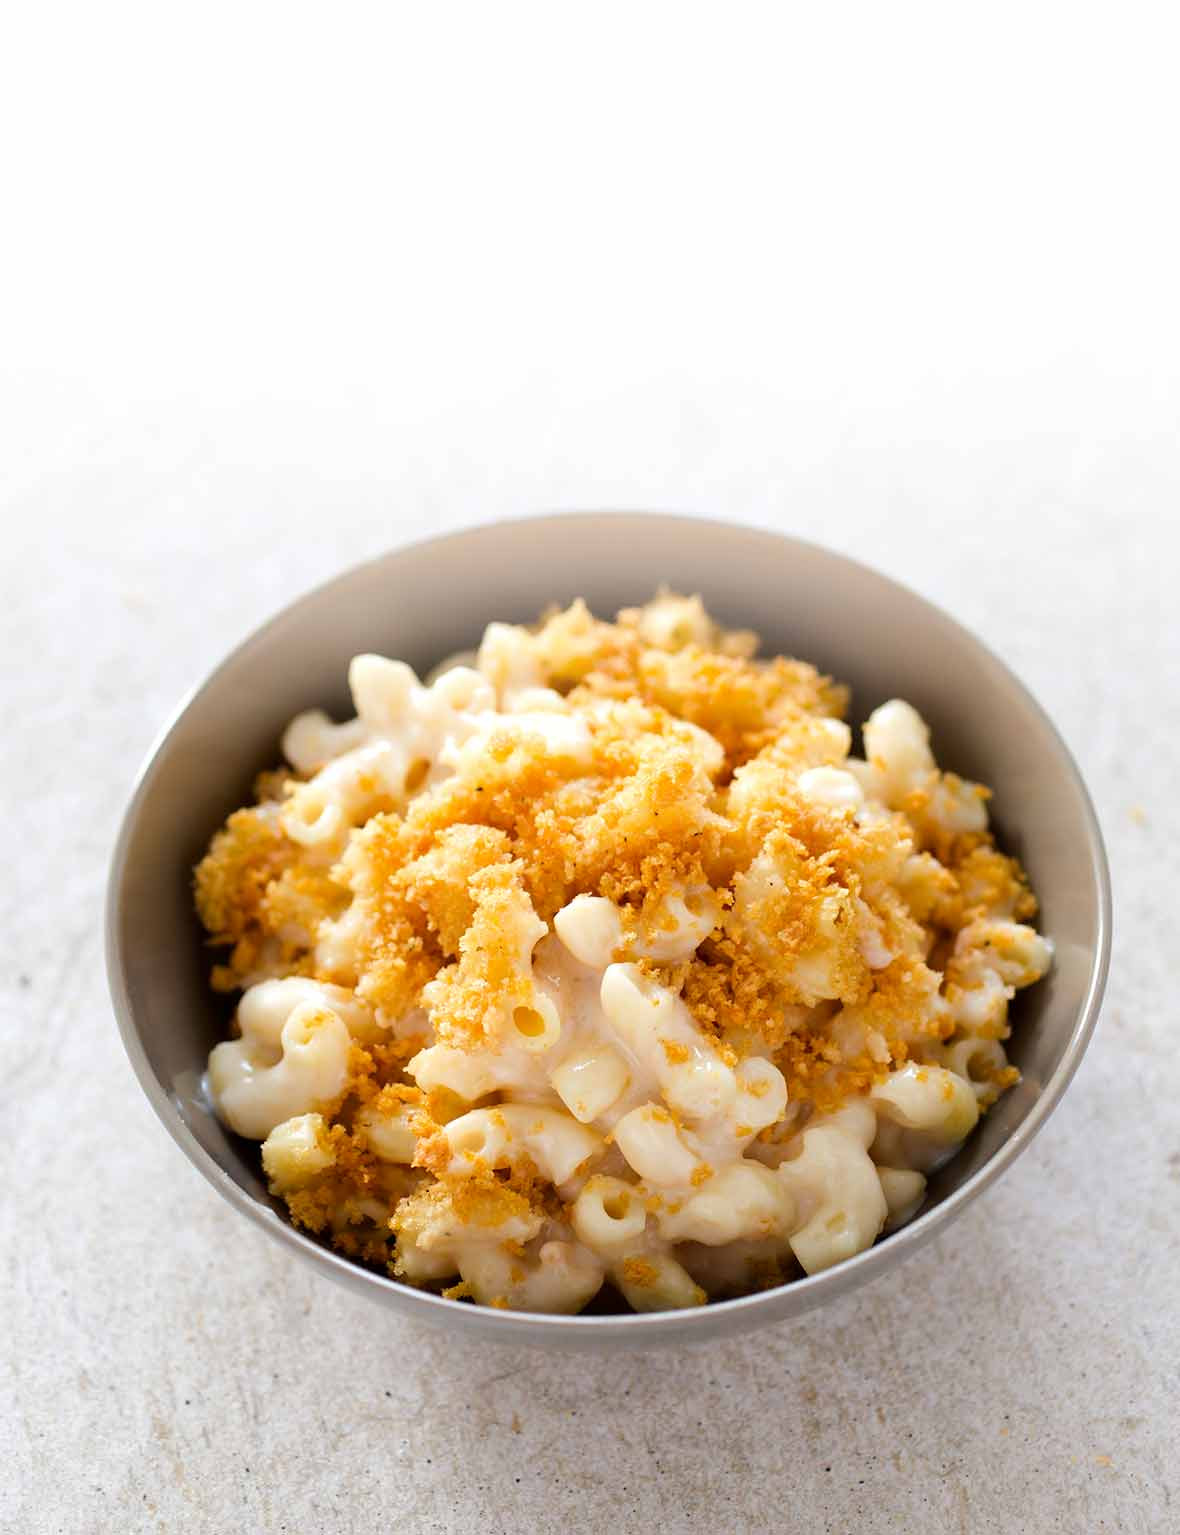 Baked Macaroni And Cheese Bread Crumbs
 Baked Mac and Cheese with Bread Crumbs Recipe